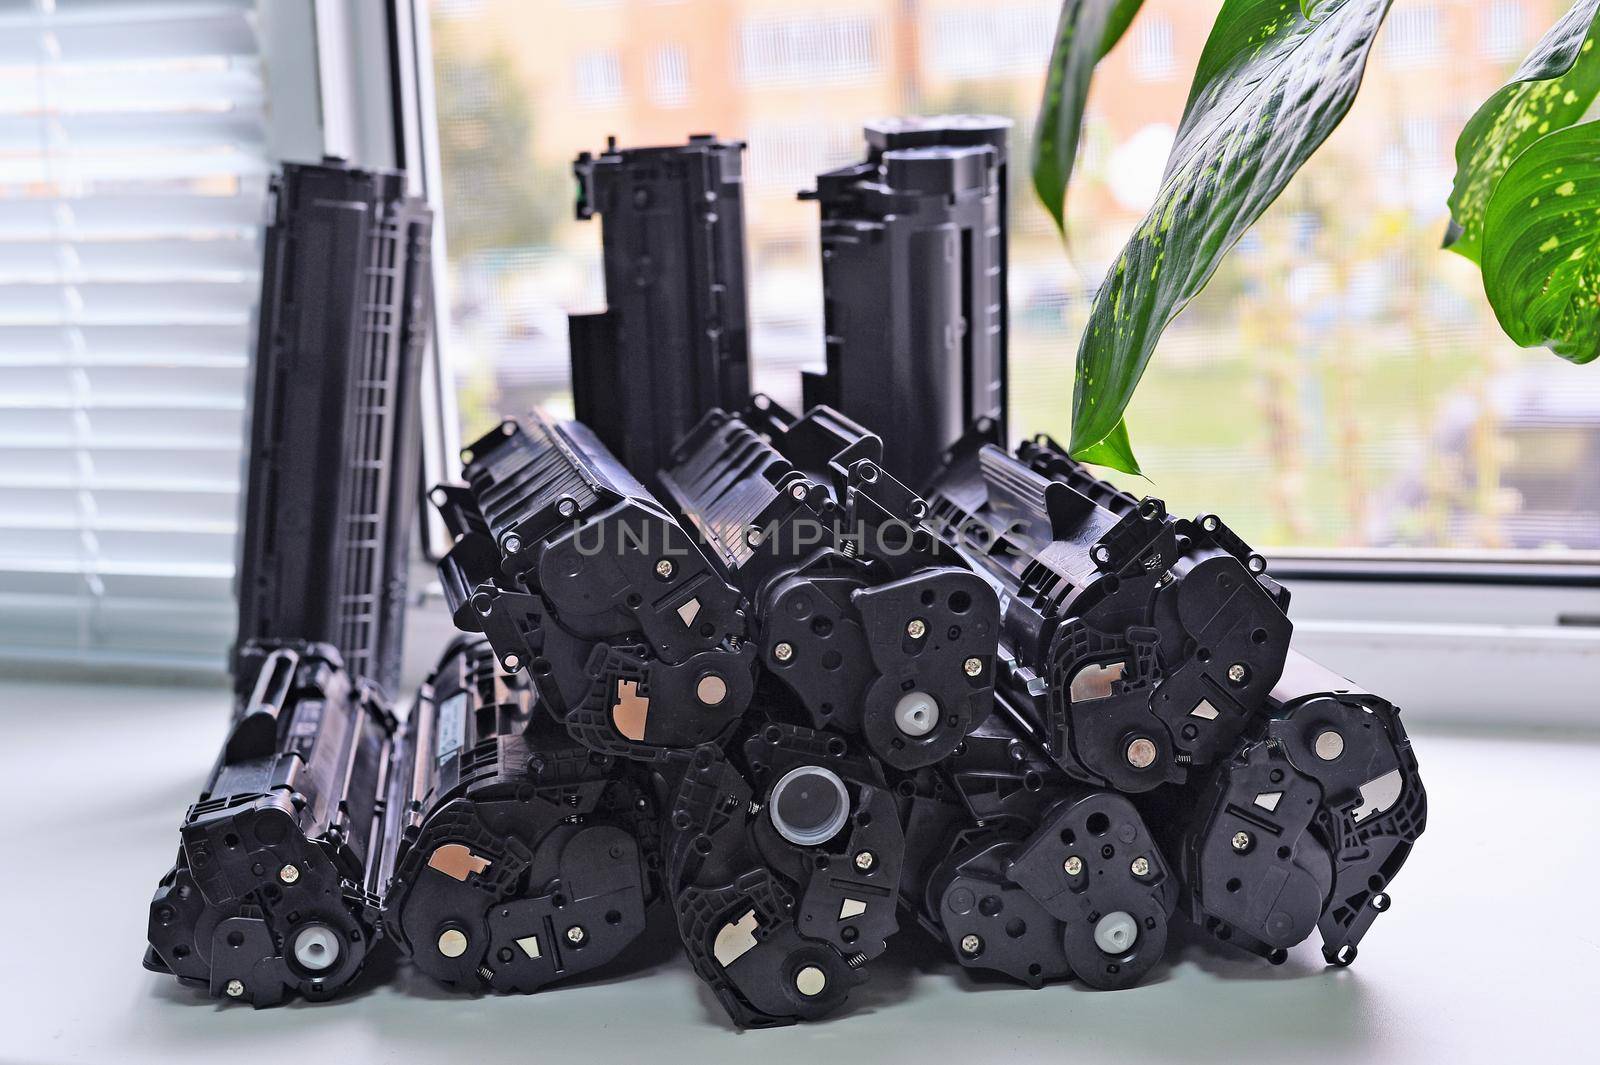 Empty cartridges from the printer stacked on the windowsill of the office. Waste production